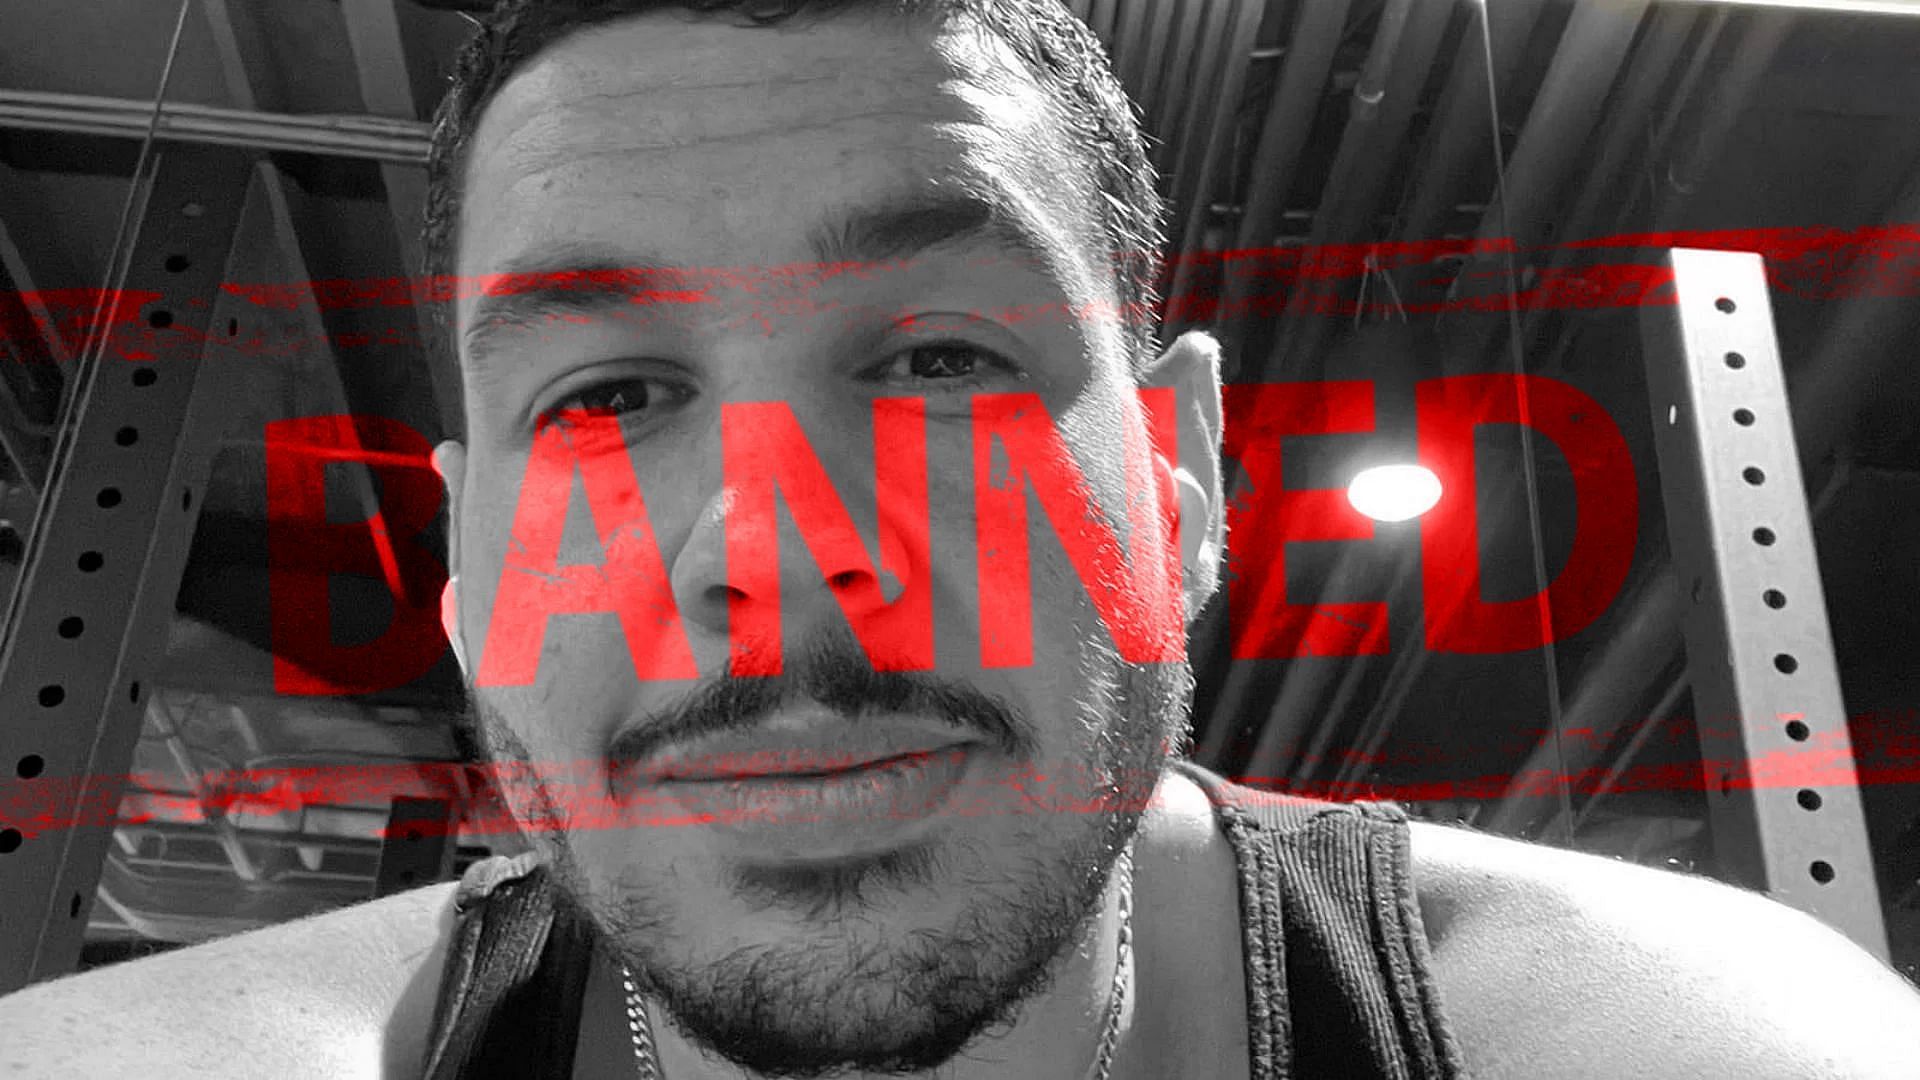 Greekgodx banned from Twitch after problematic clip goes viral (Image via Sportskeeda)